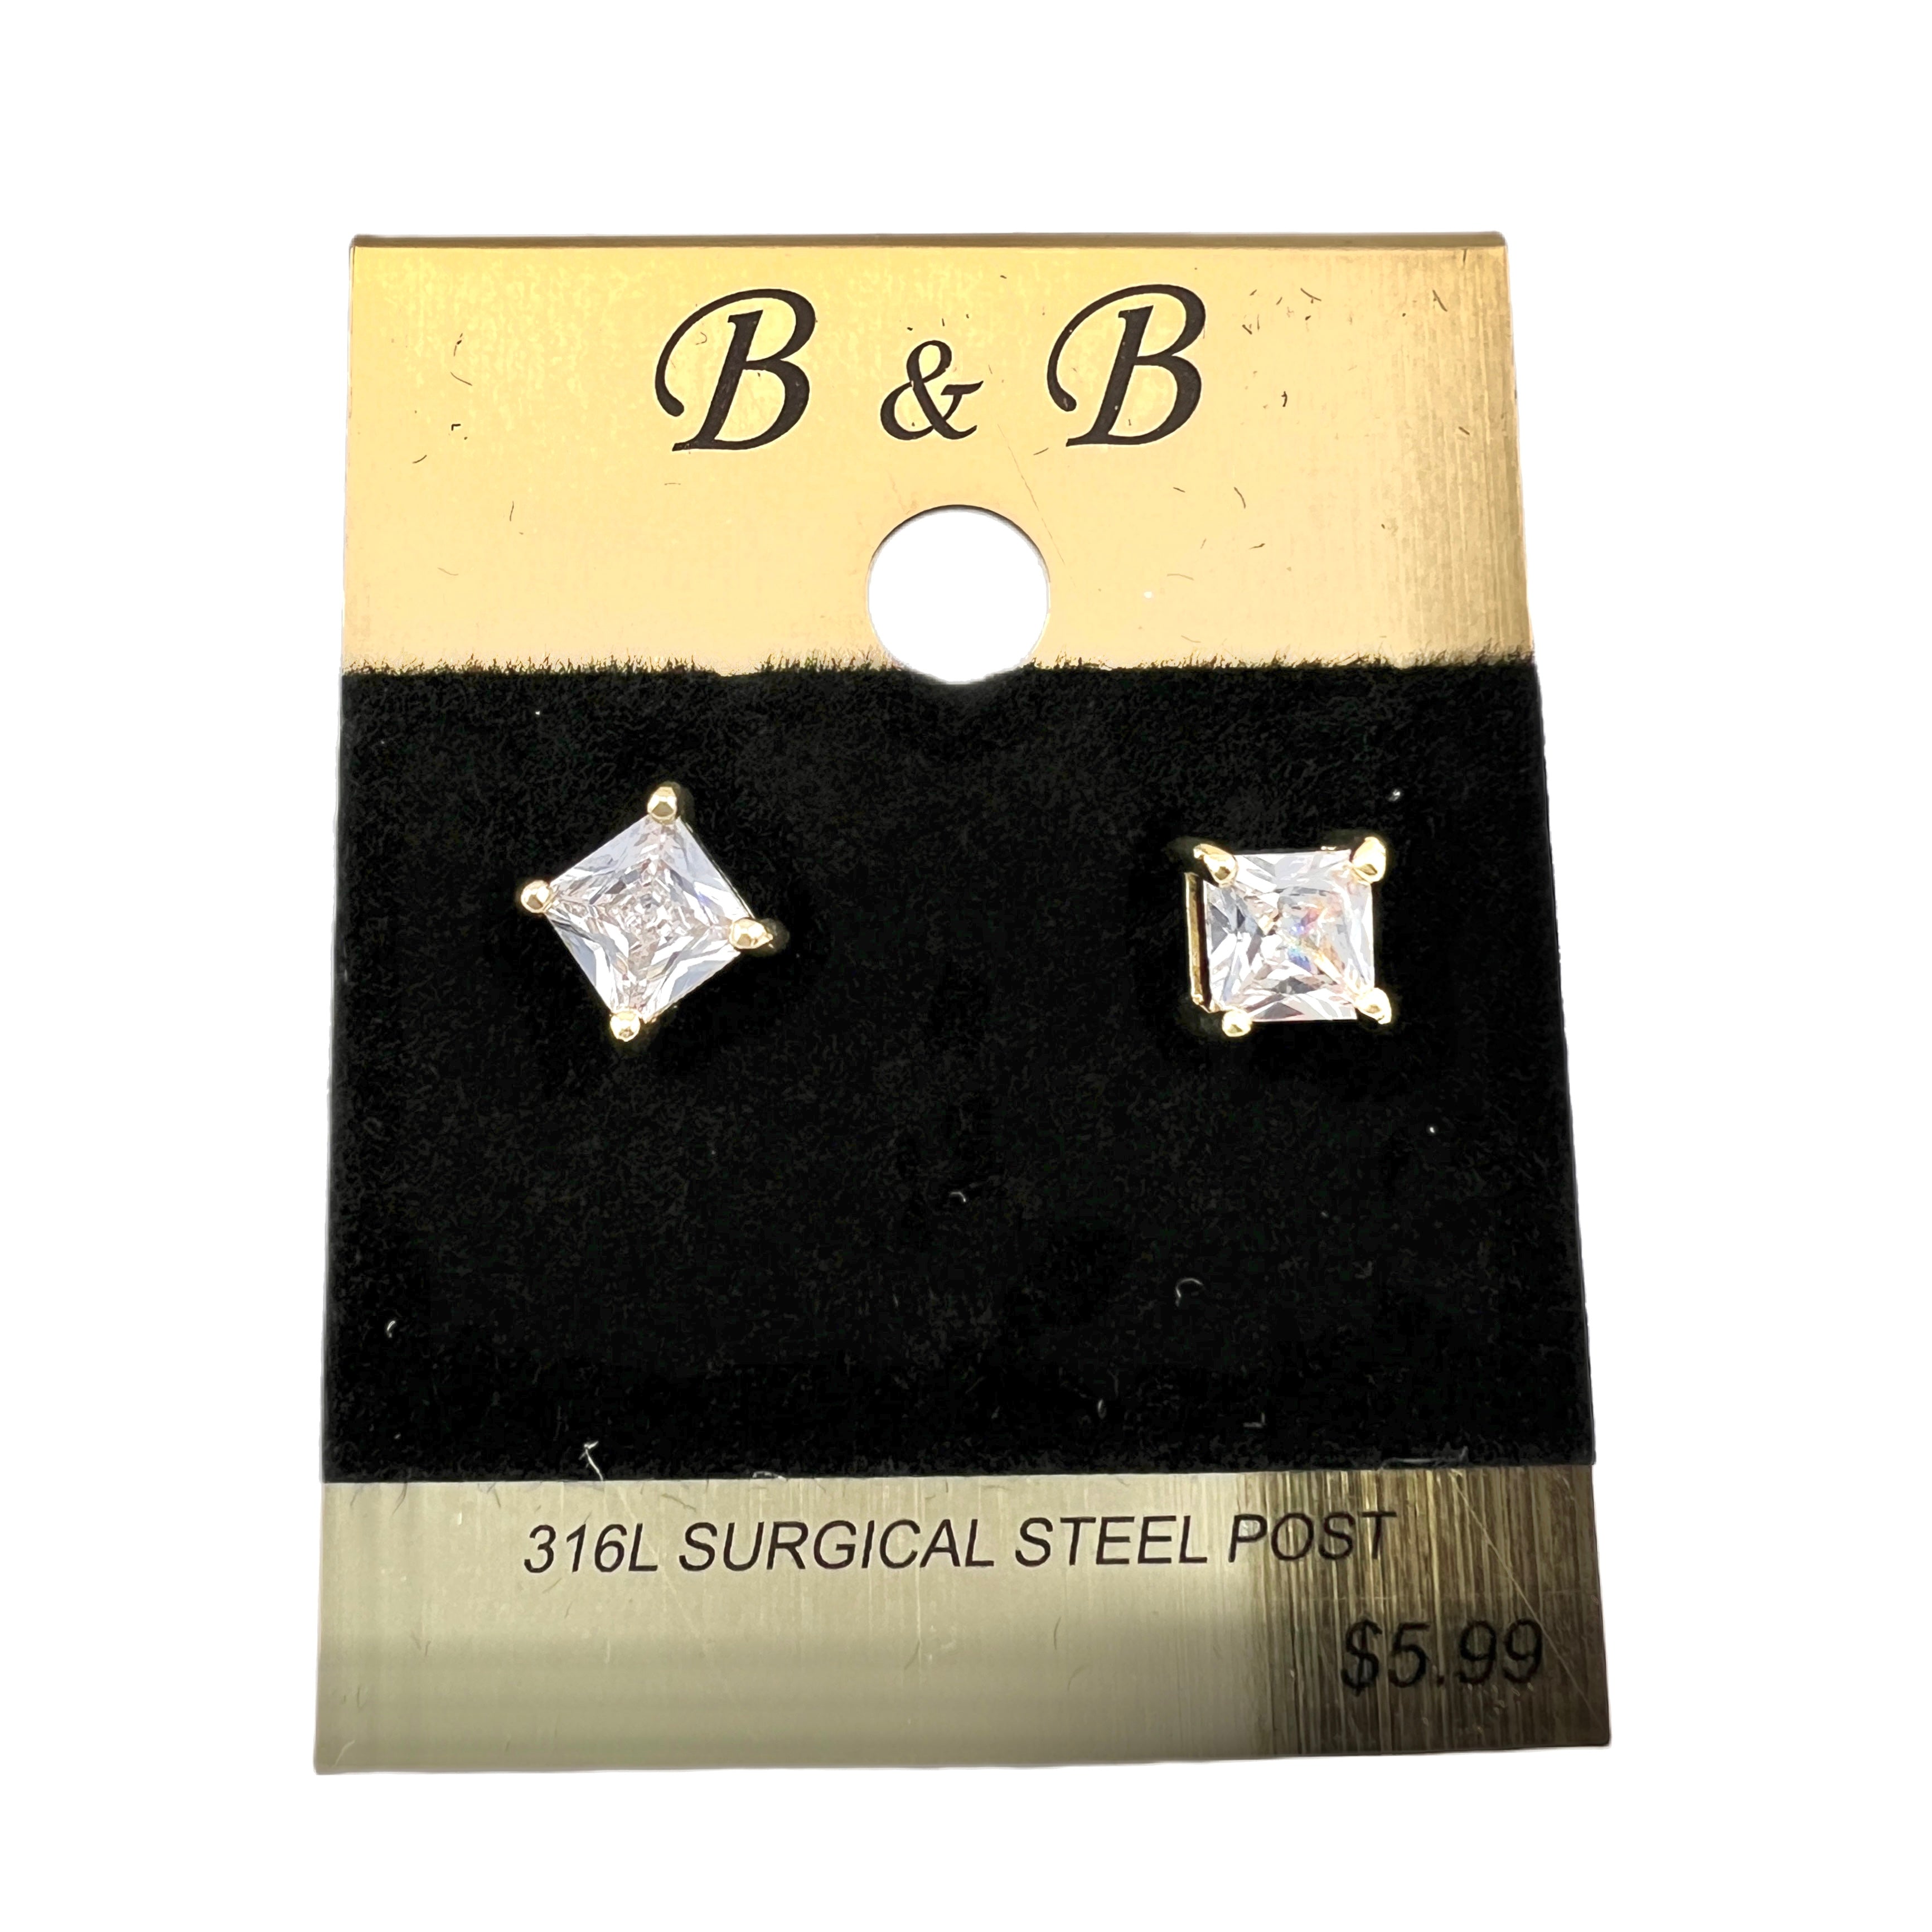 B&B Gold Color Cubic Zirconia Square Stud Earrings